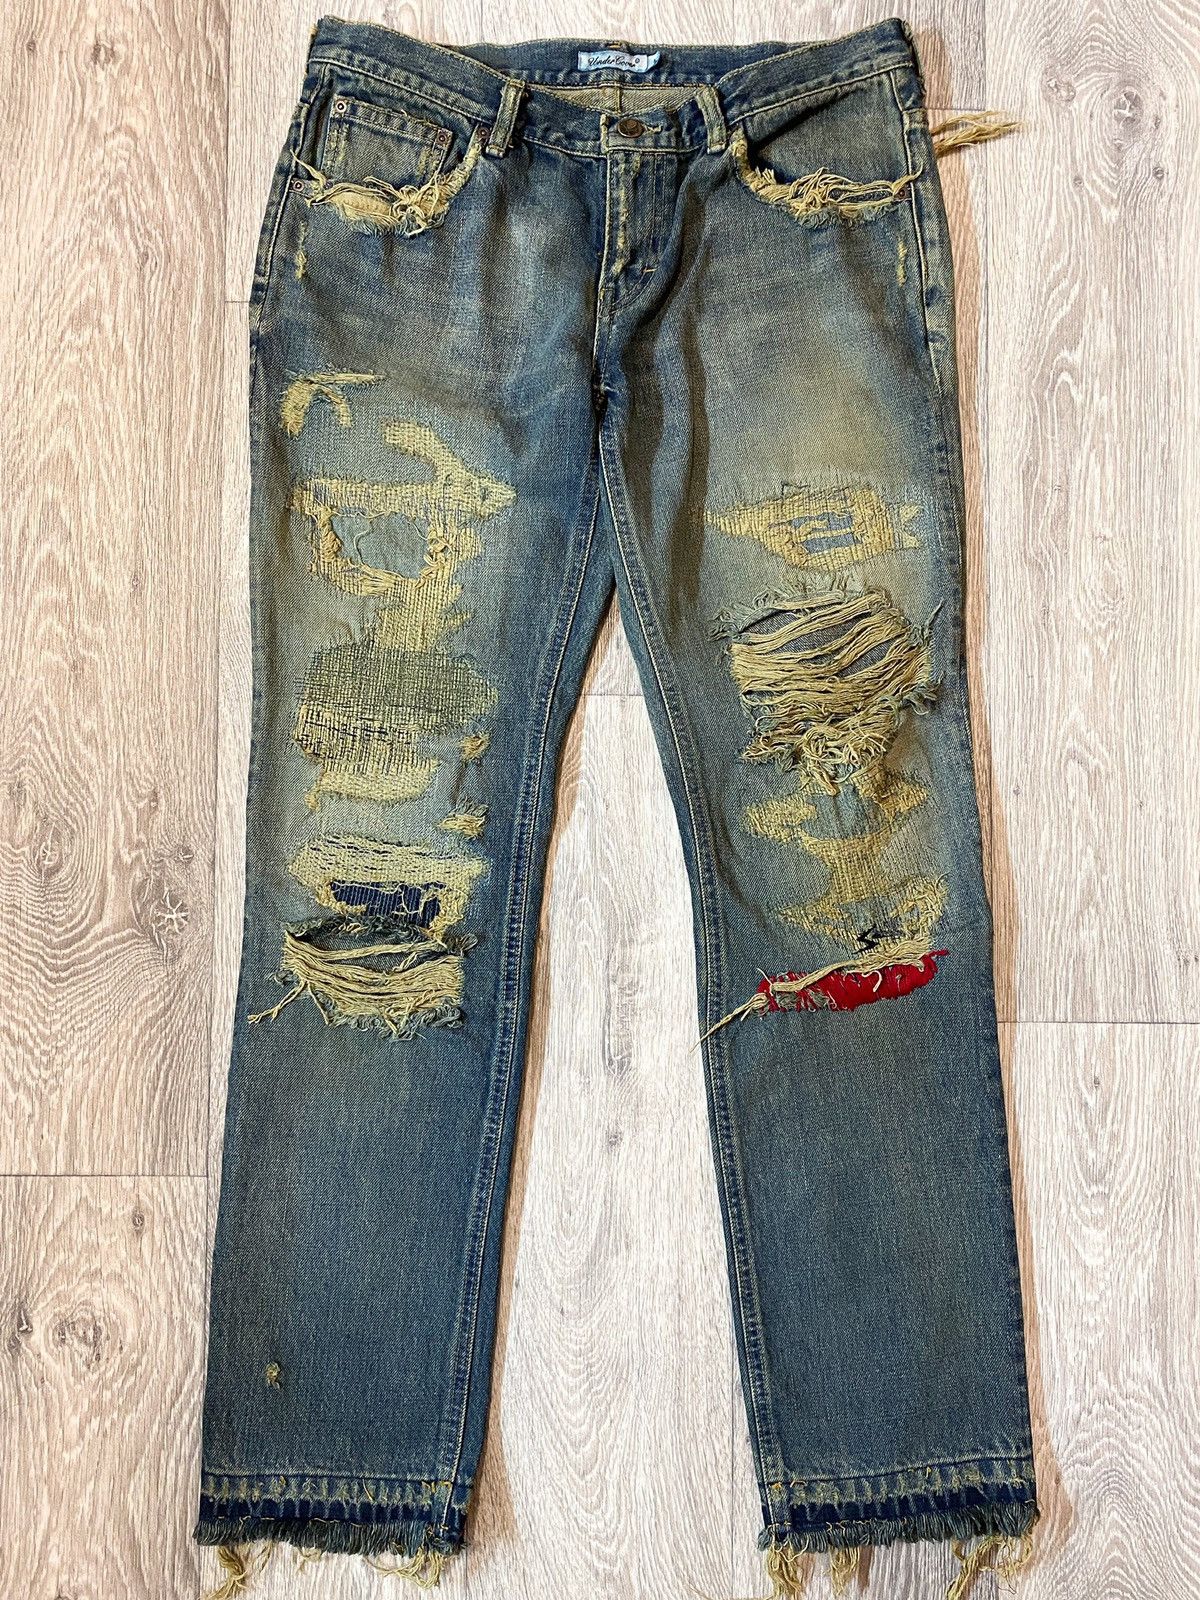 Pre-owned Undercover 68 Red Yarn Denim Distressed Aw04 “but Beautiful” In Blue